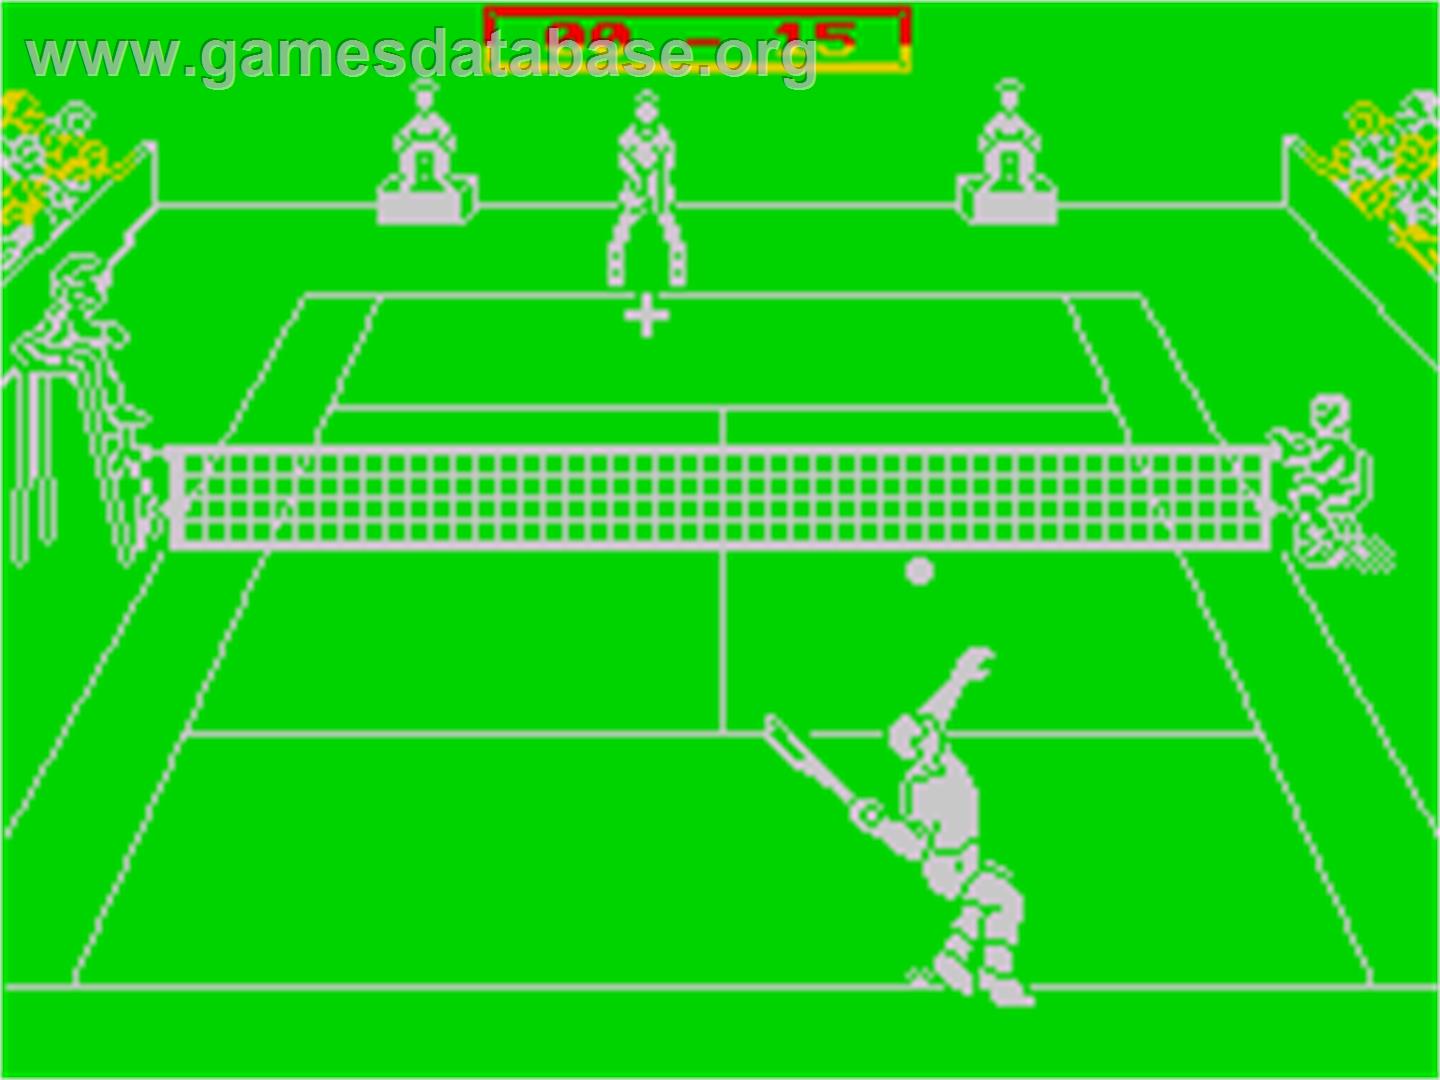 Jimmy Connors Pro Tennis Tour - Sinclair ZX Spectrum - Artwork - In Game